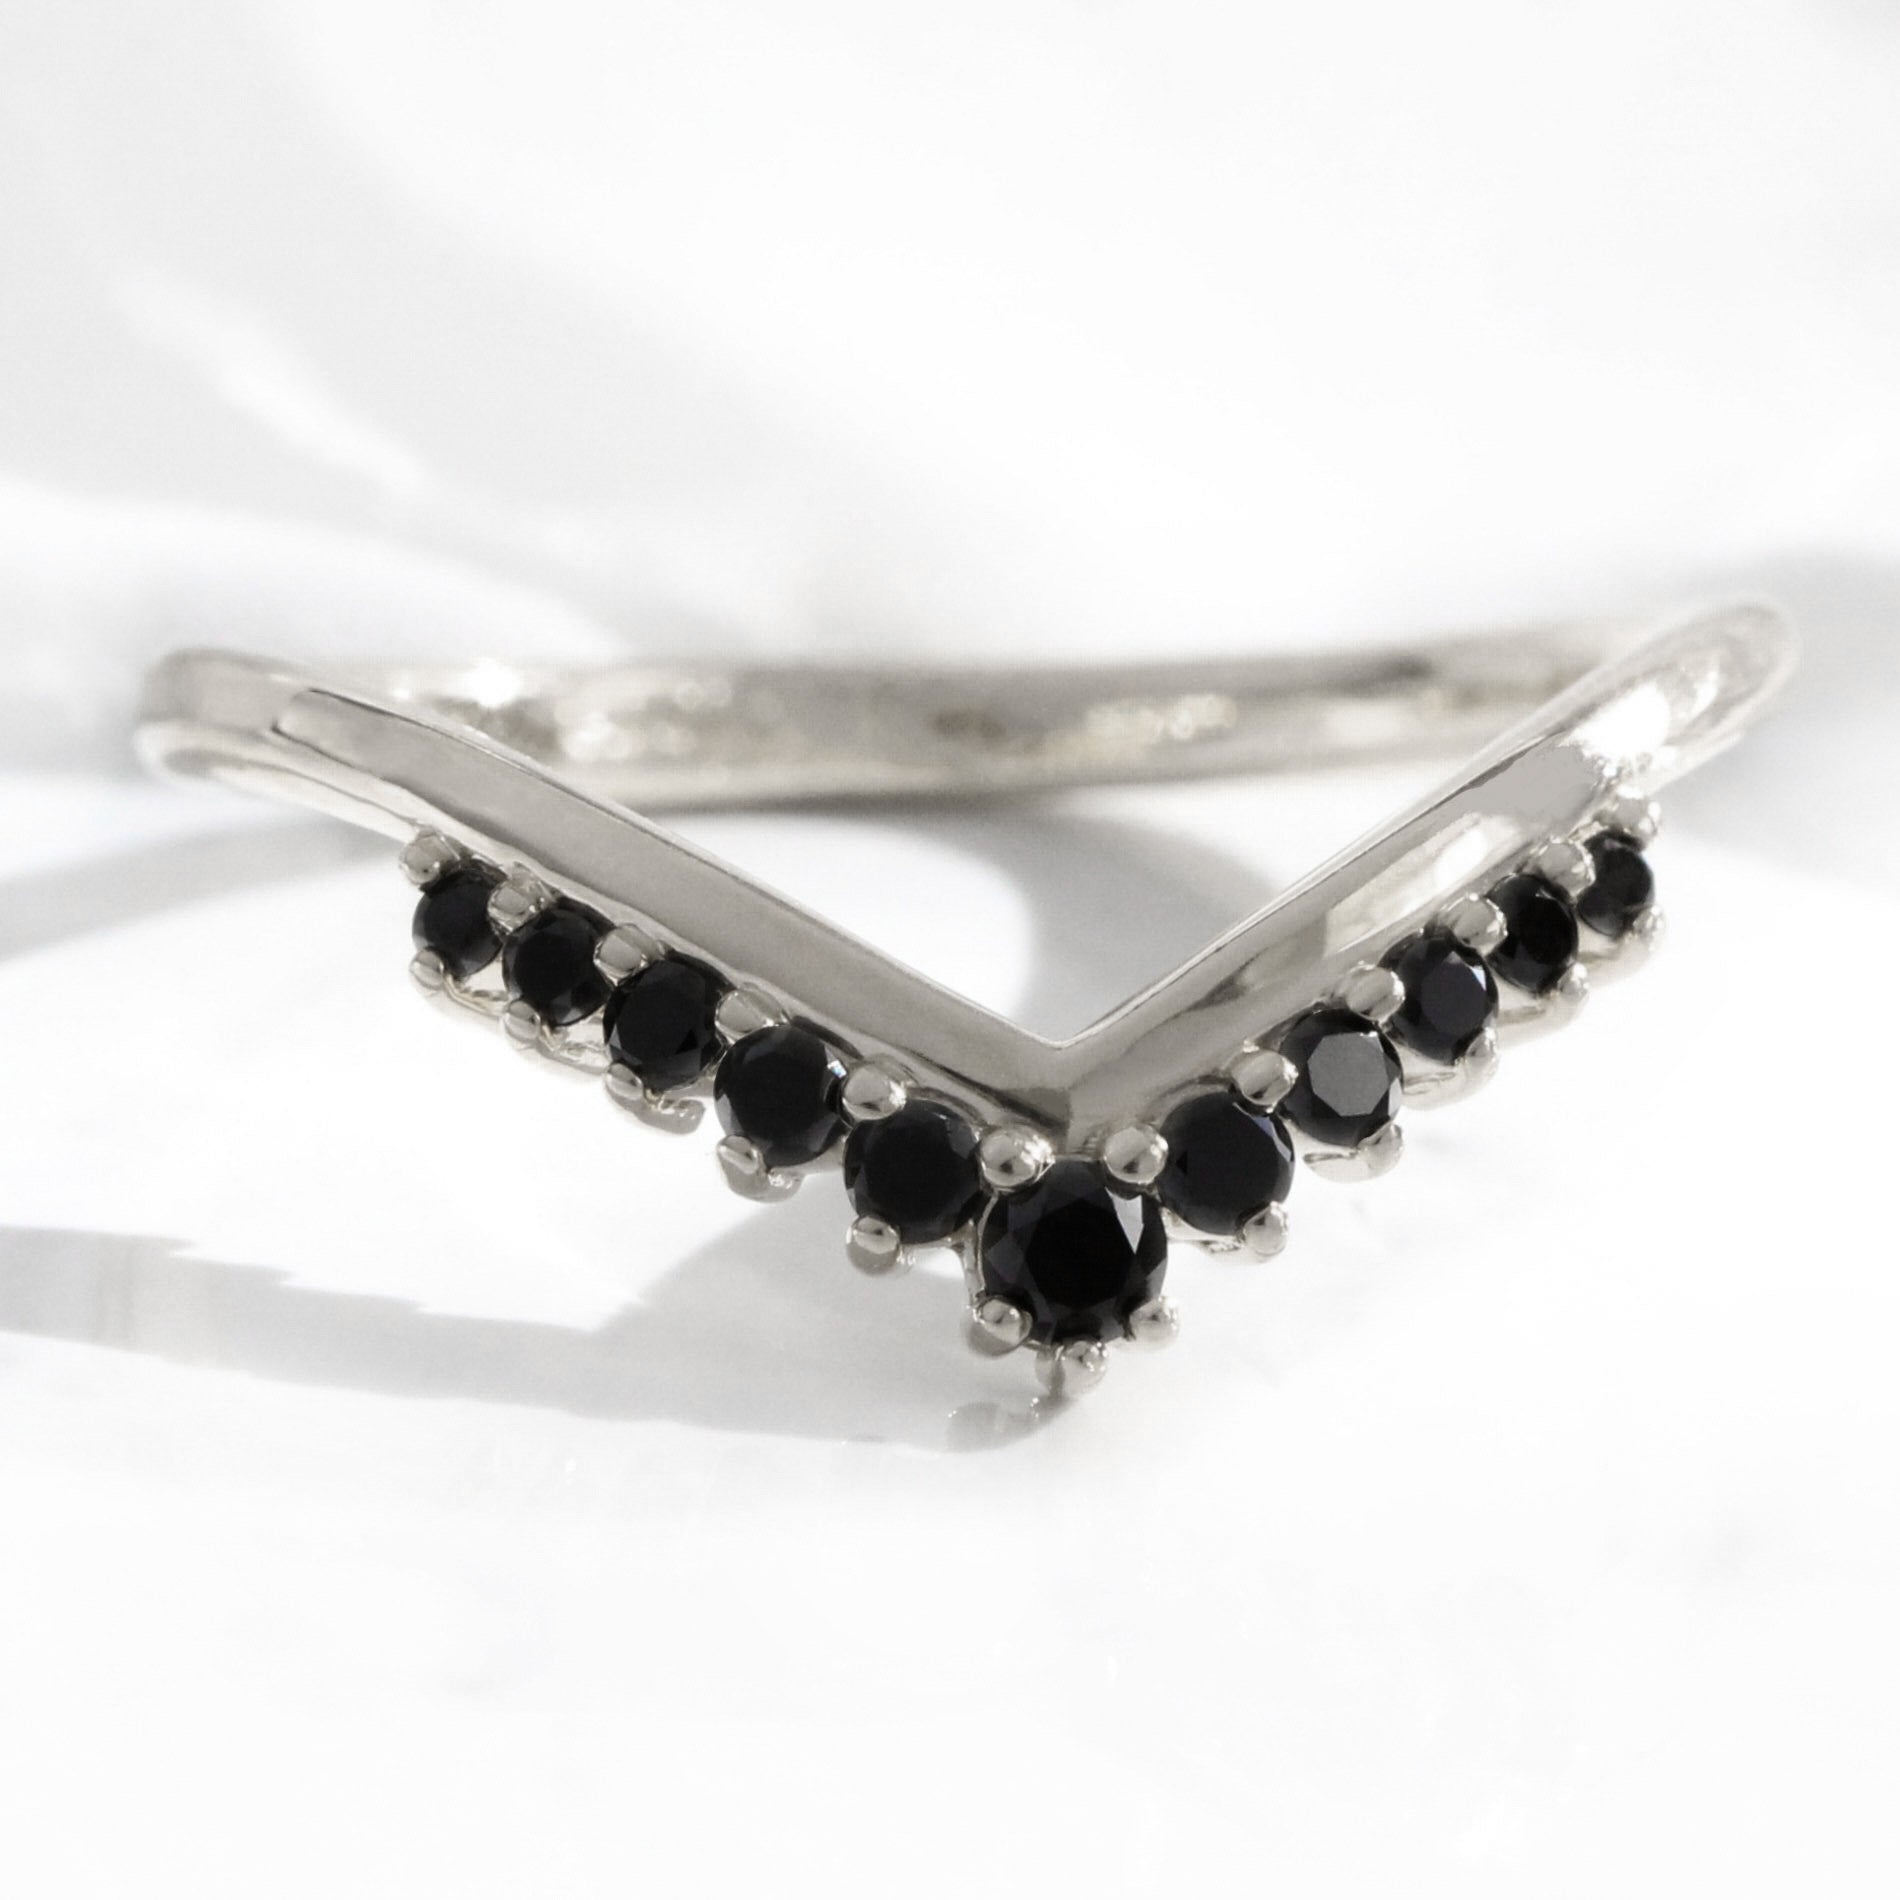 Tiara black diamond wedding ring white gold curved V shaped band by la more design jewelry